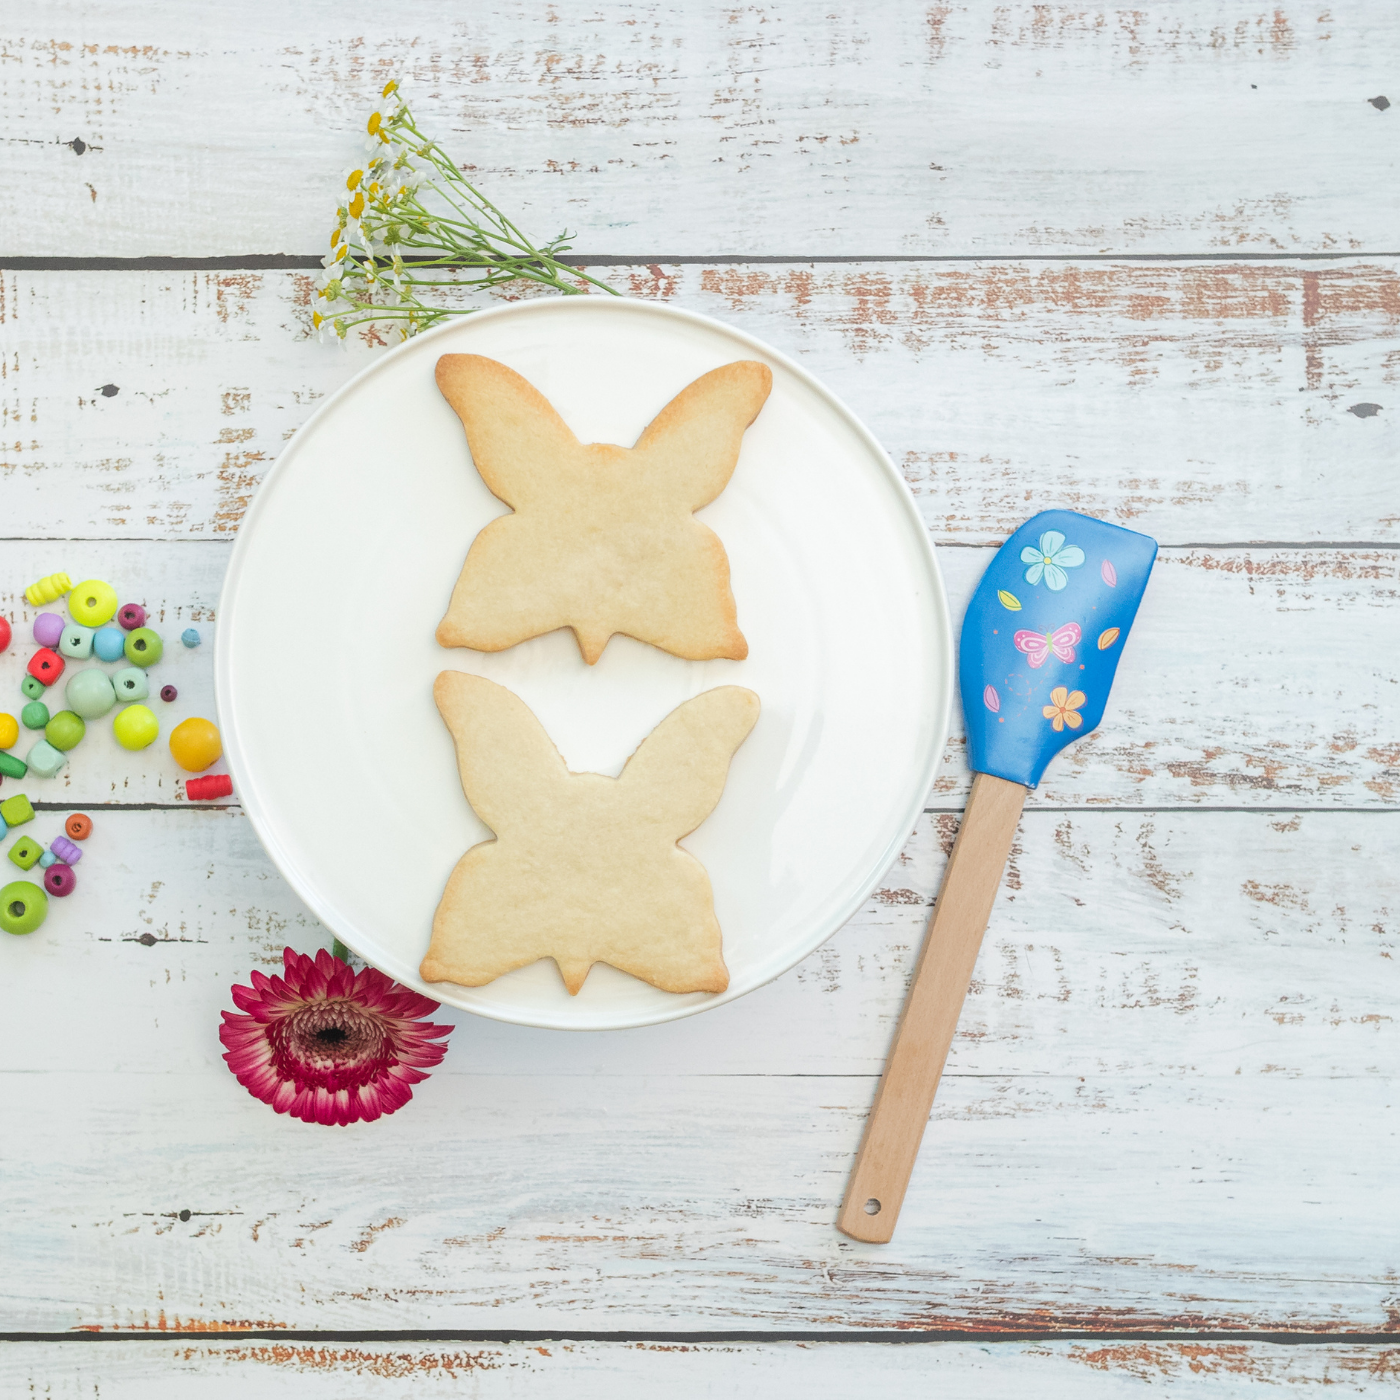 Lifestyle image of two butterfly shaped cookies 